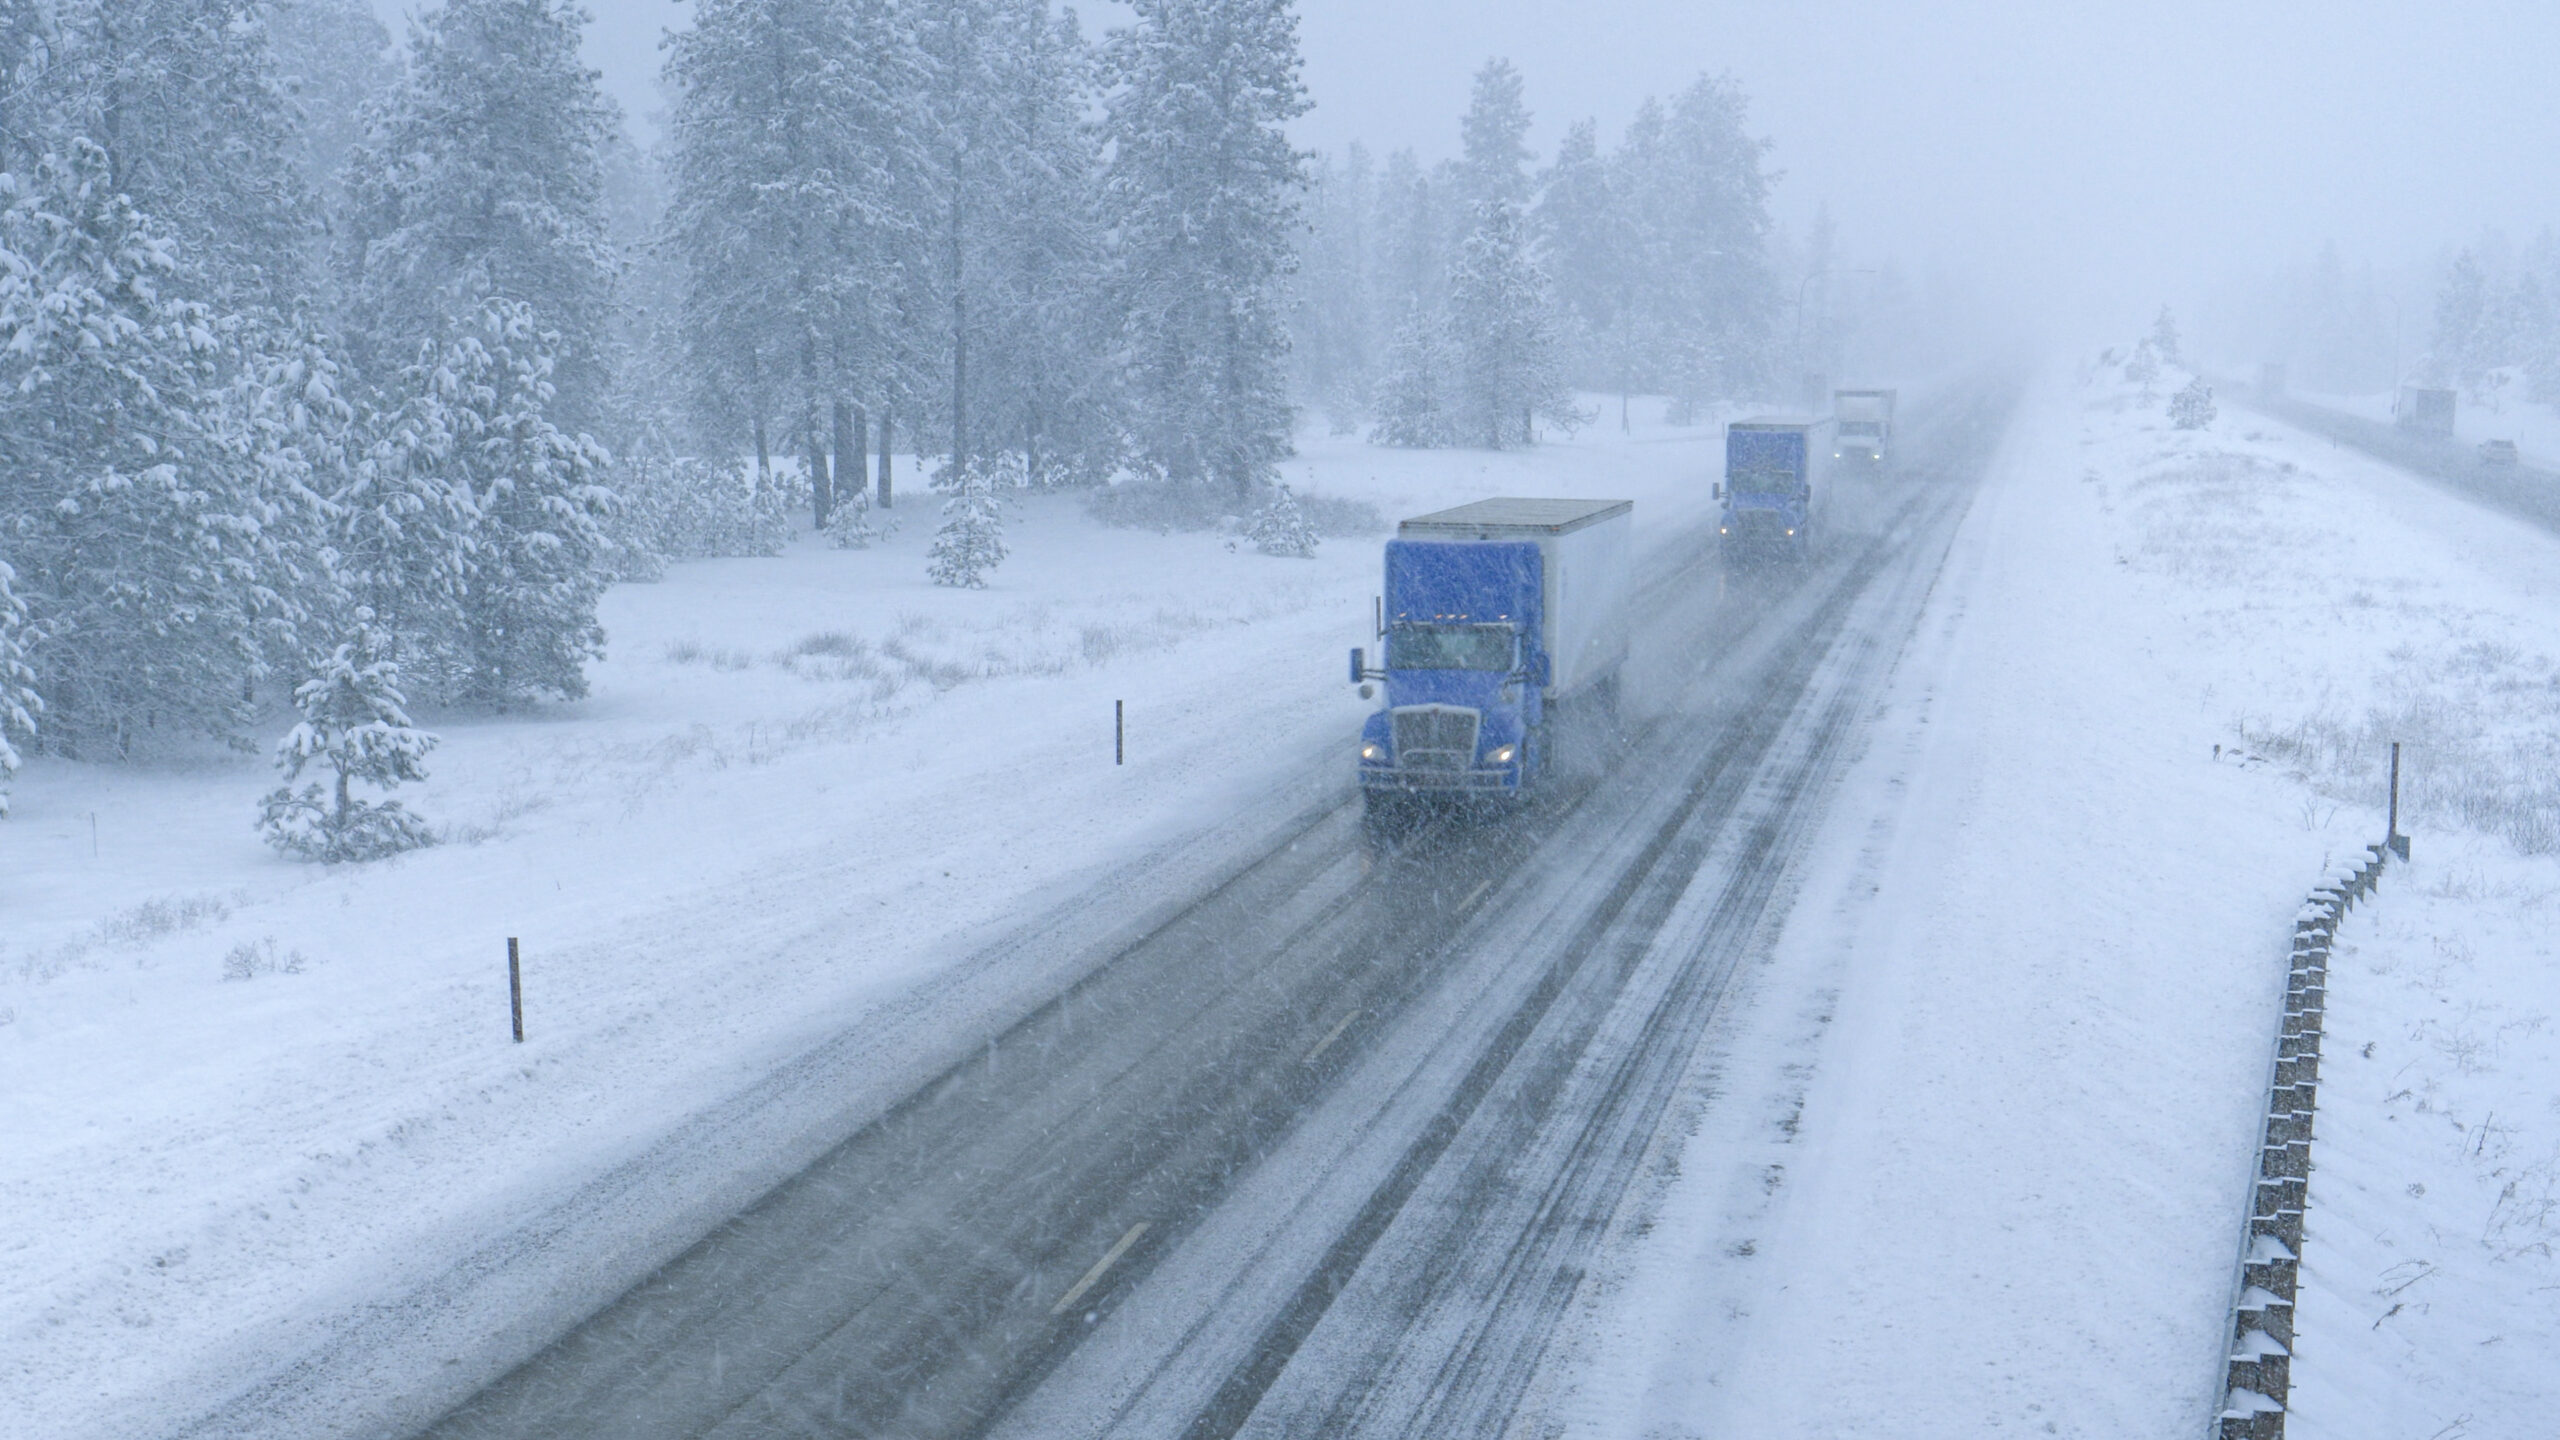 Trucks haul containers on road through a snowstorm.